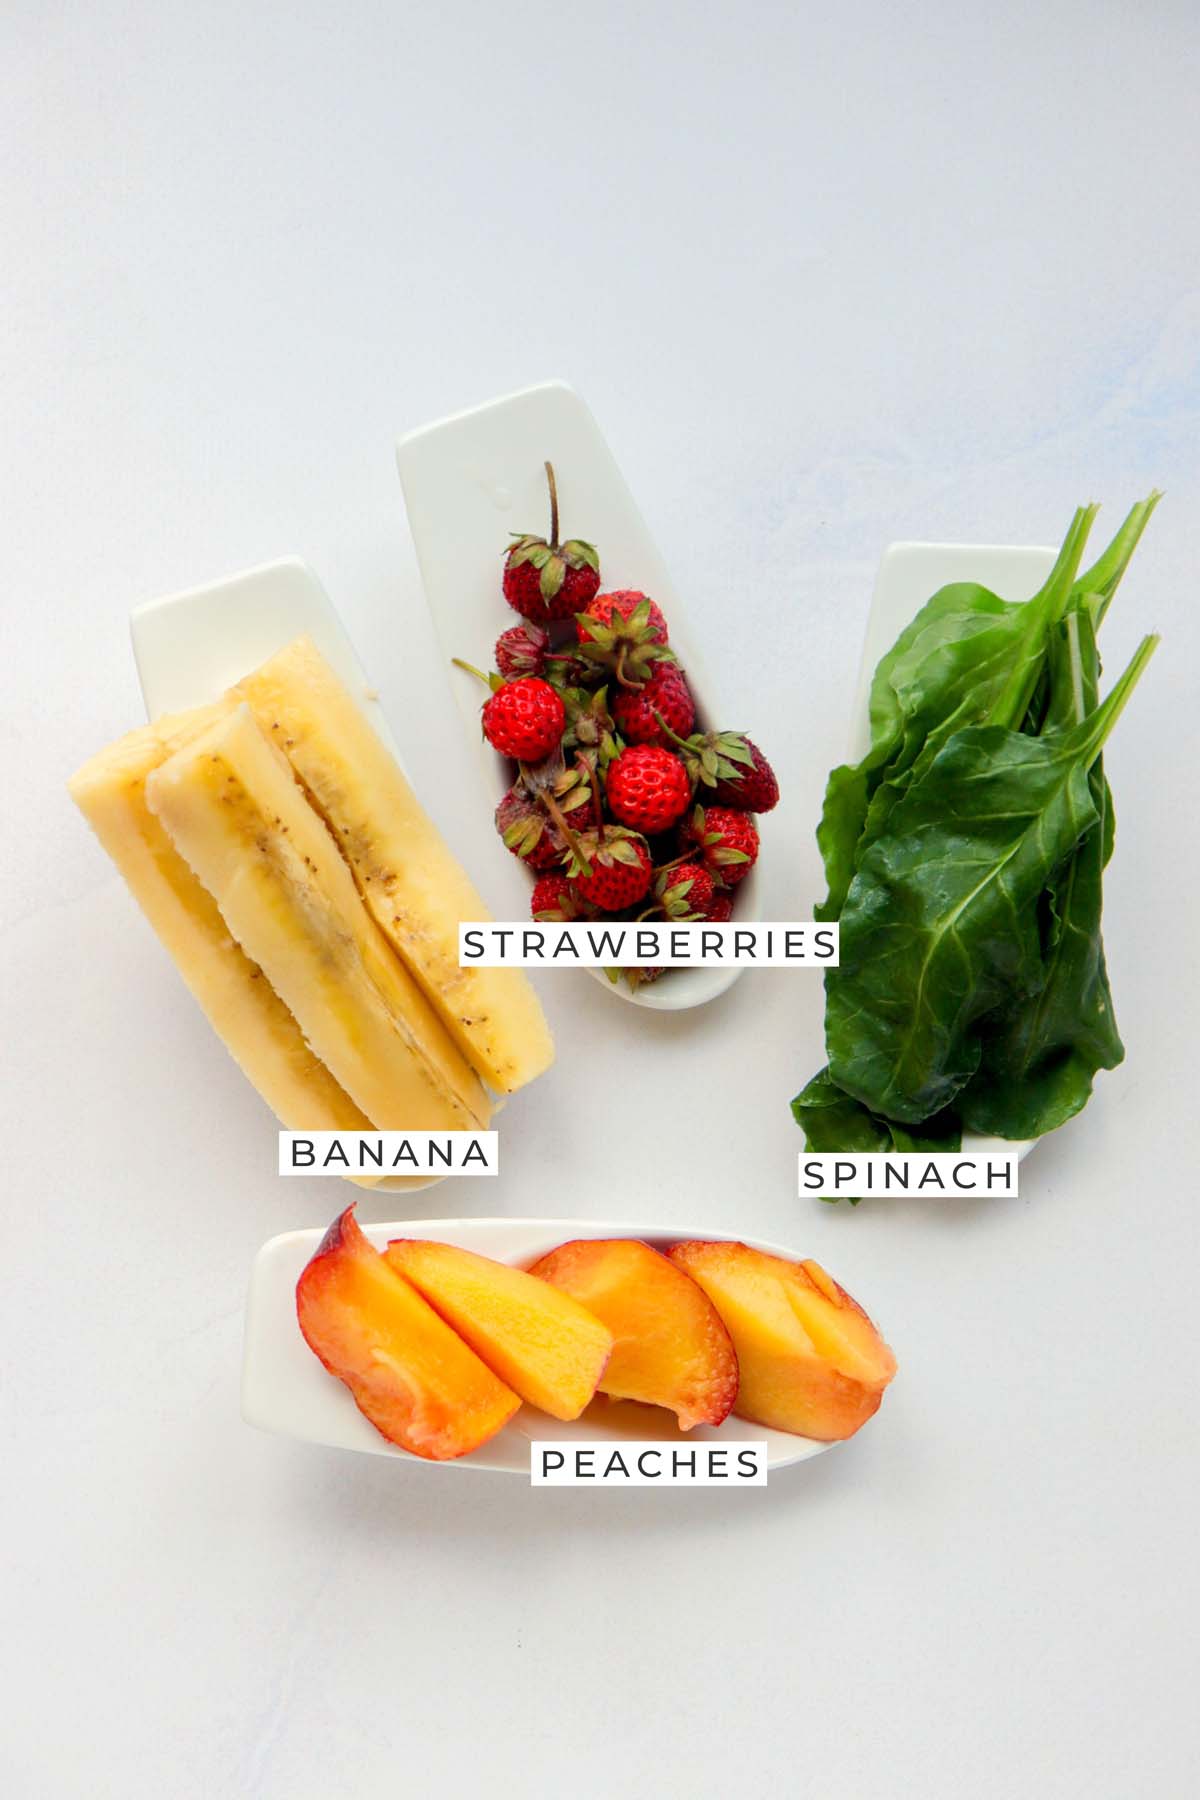 Labeled ingredients for the smoothie.